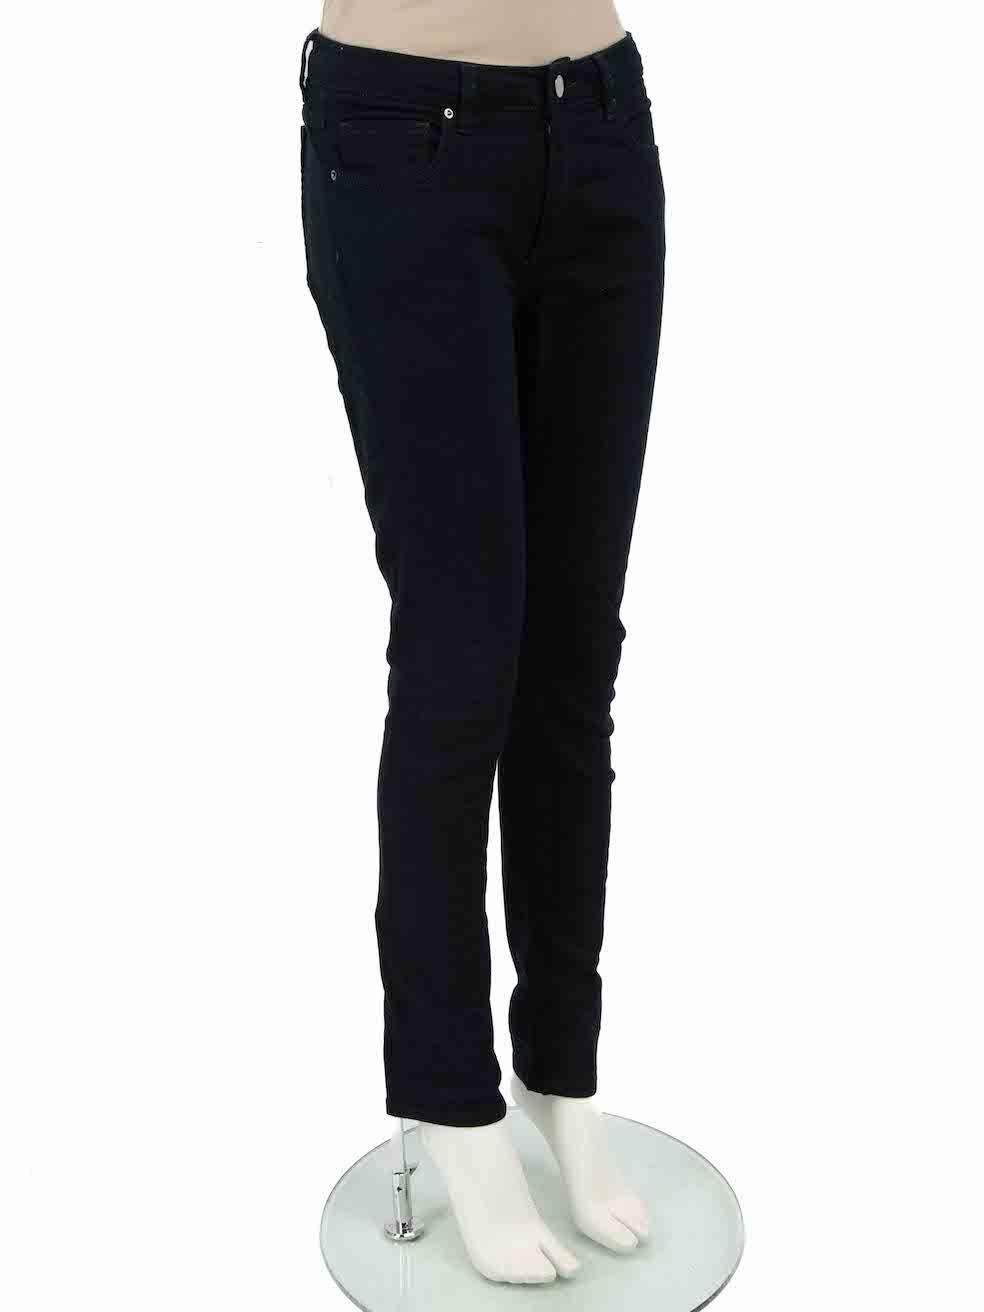 CONDITION is Very good. Minimal wear to jeans is evident. Minimal wear to the waistband lining with light pilling on this used Victoria Beckham jeans designer resale item.
 
Details
Blue
Denim
Jeans
Skinny fit
Mid rise
3x Front pockets
2x Back